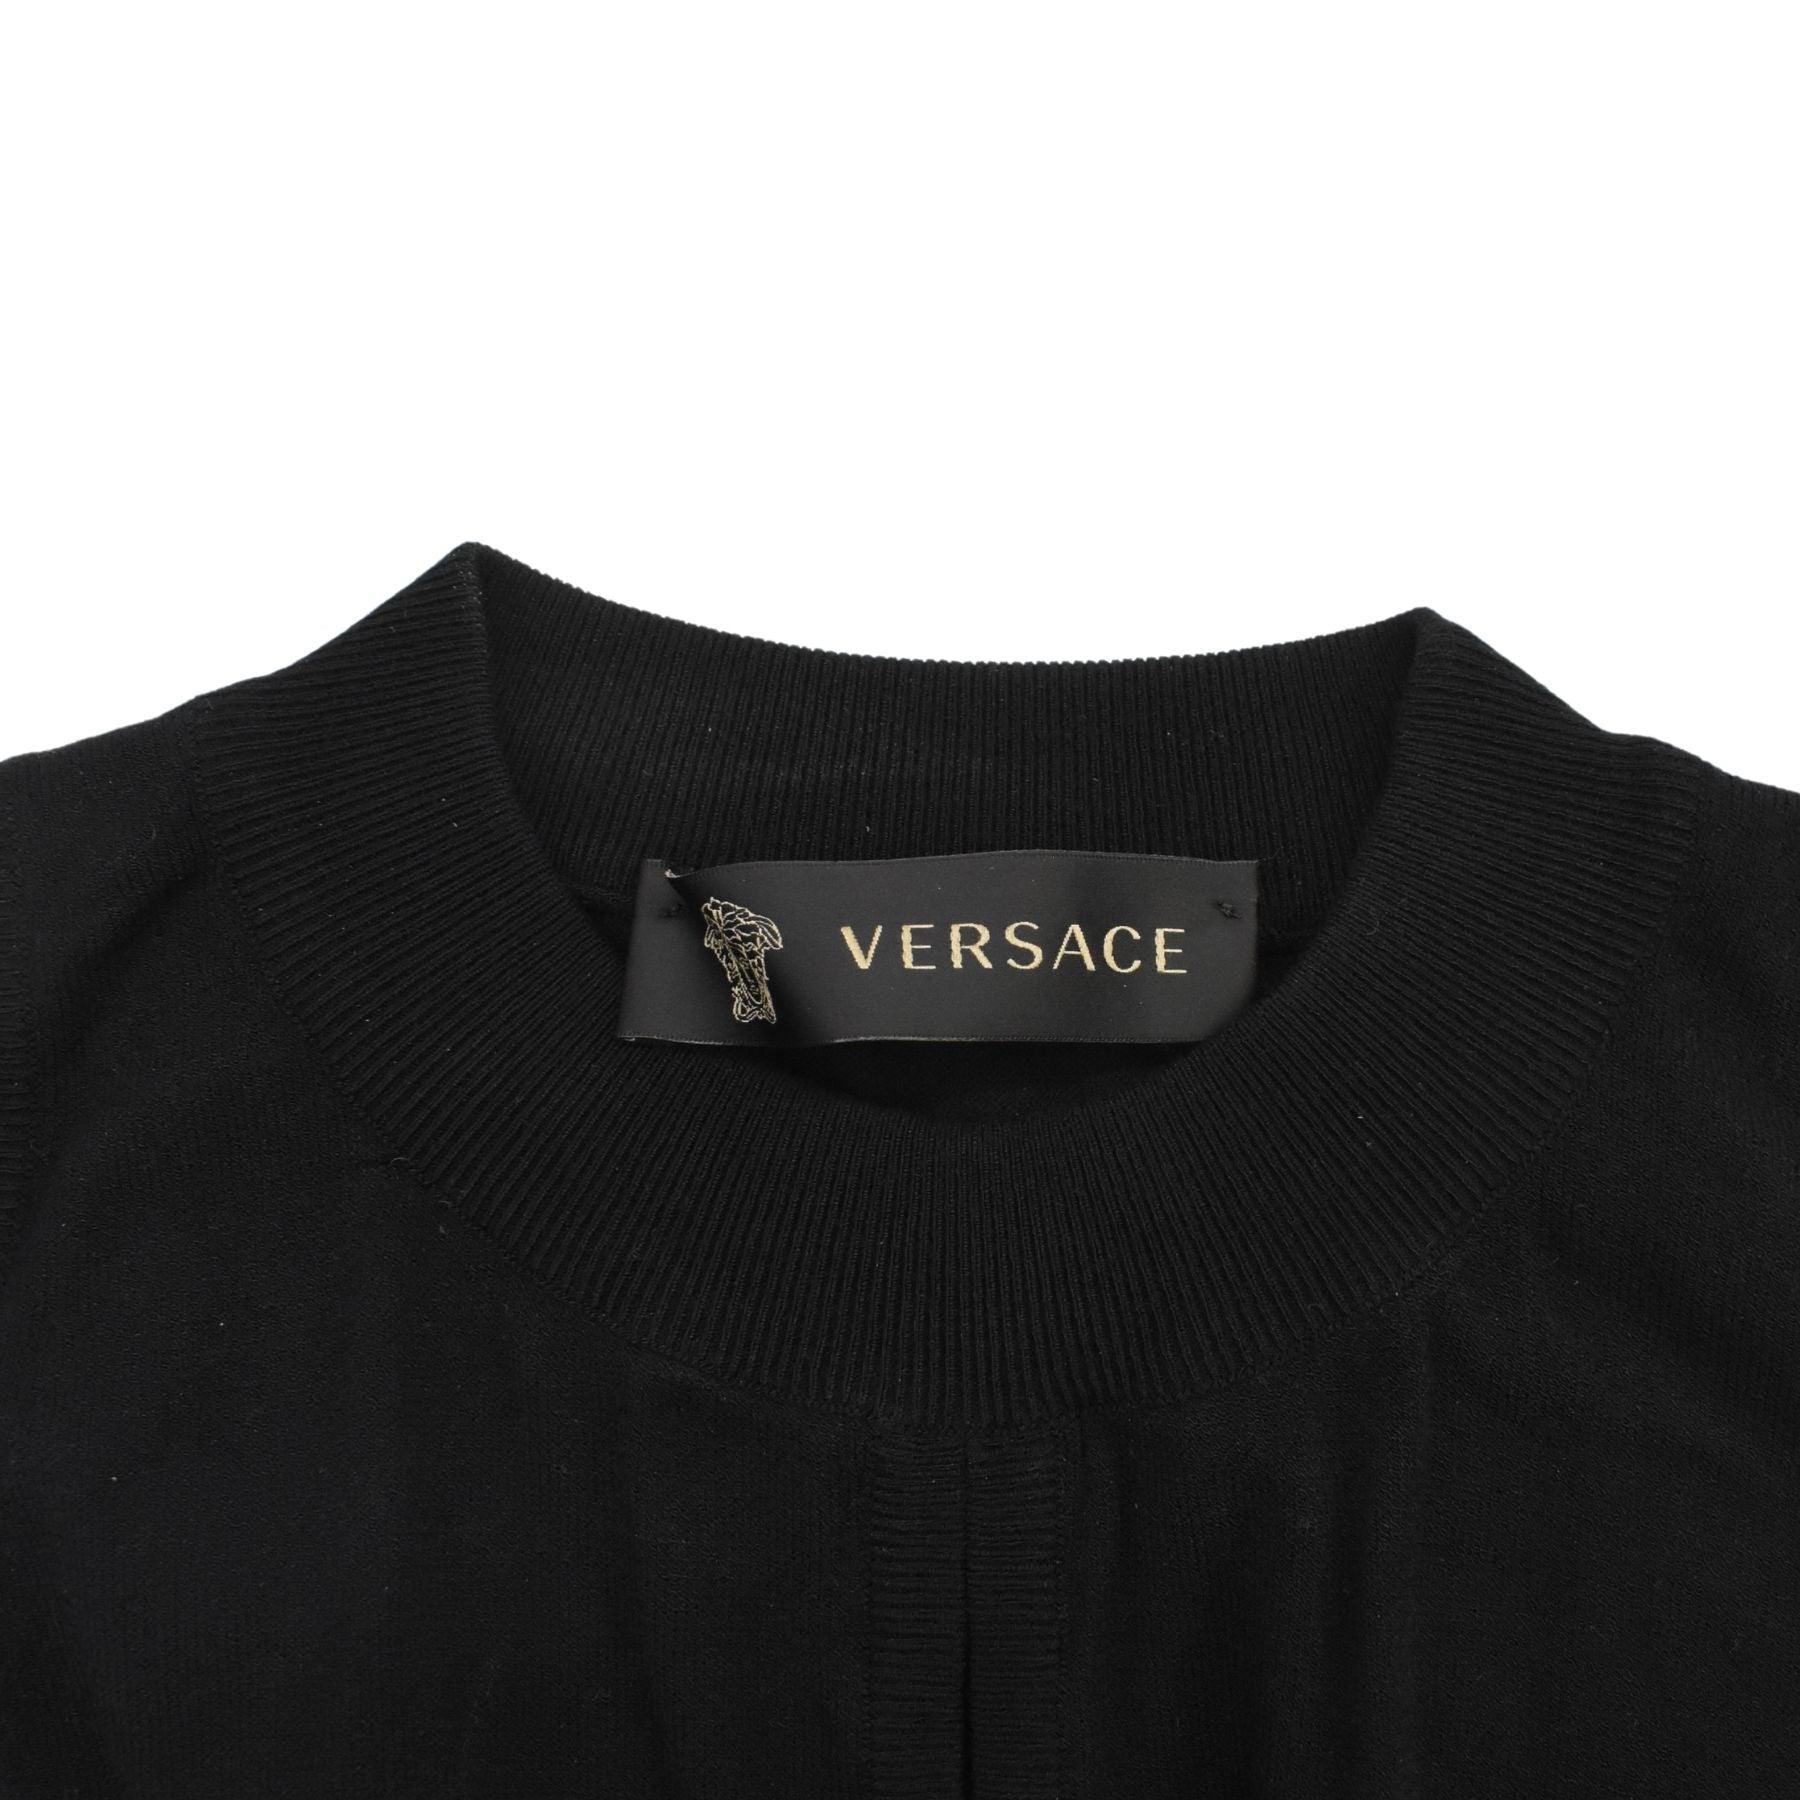 Versace Tank Top - Women's 38 - Fashionably Yours